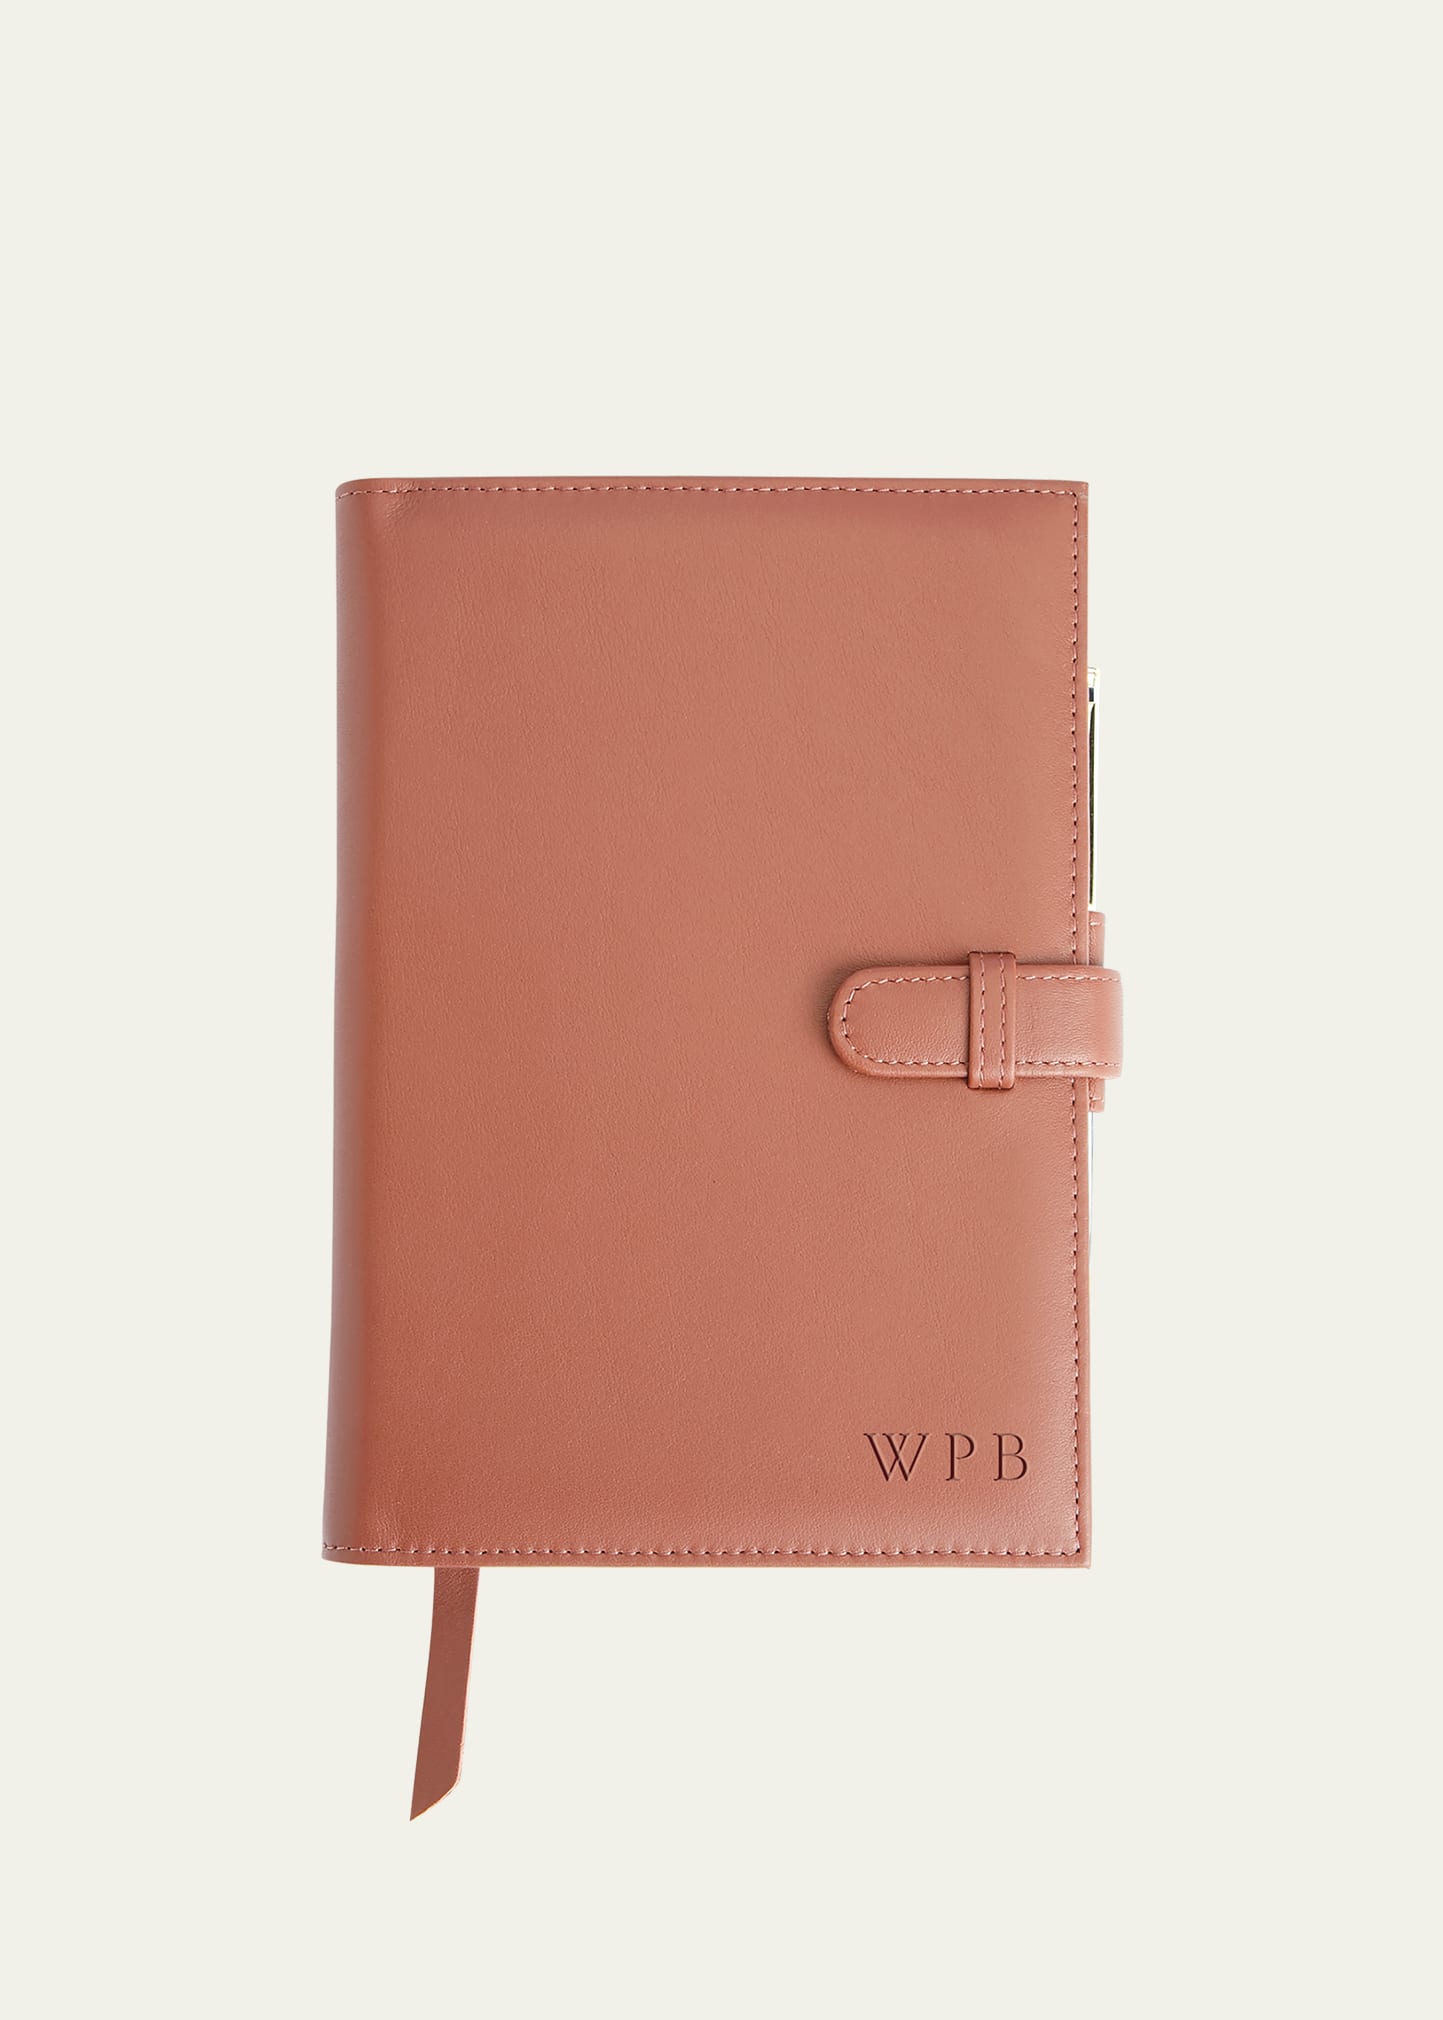 Royce New York Personalized Executive Leather Daily Planner In Tan